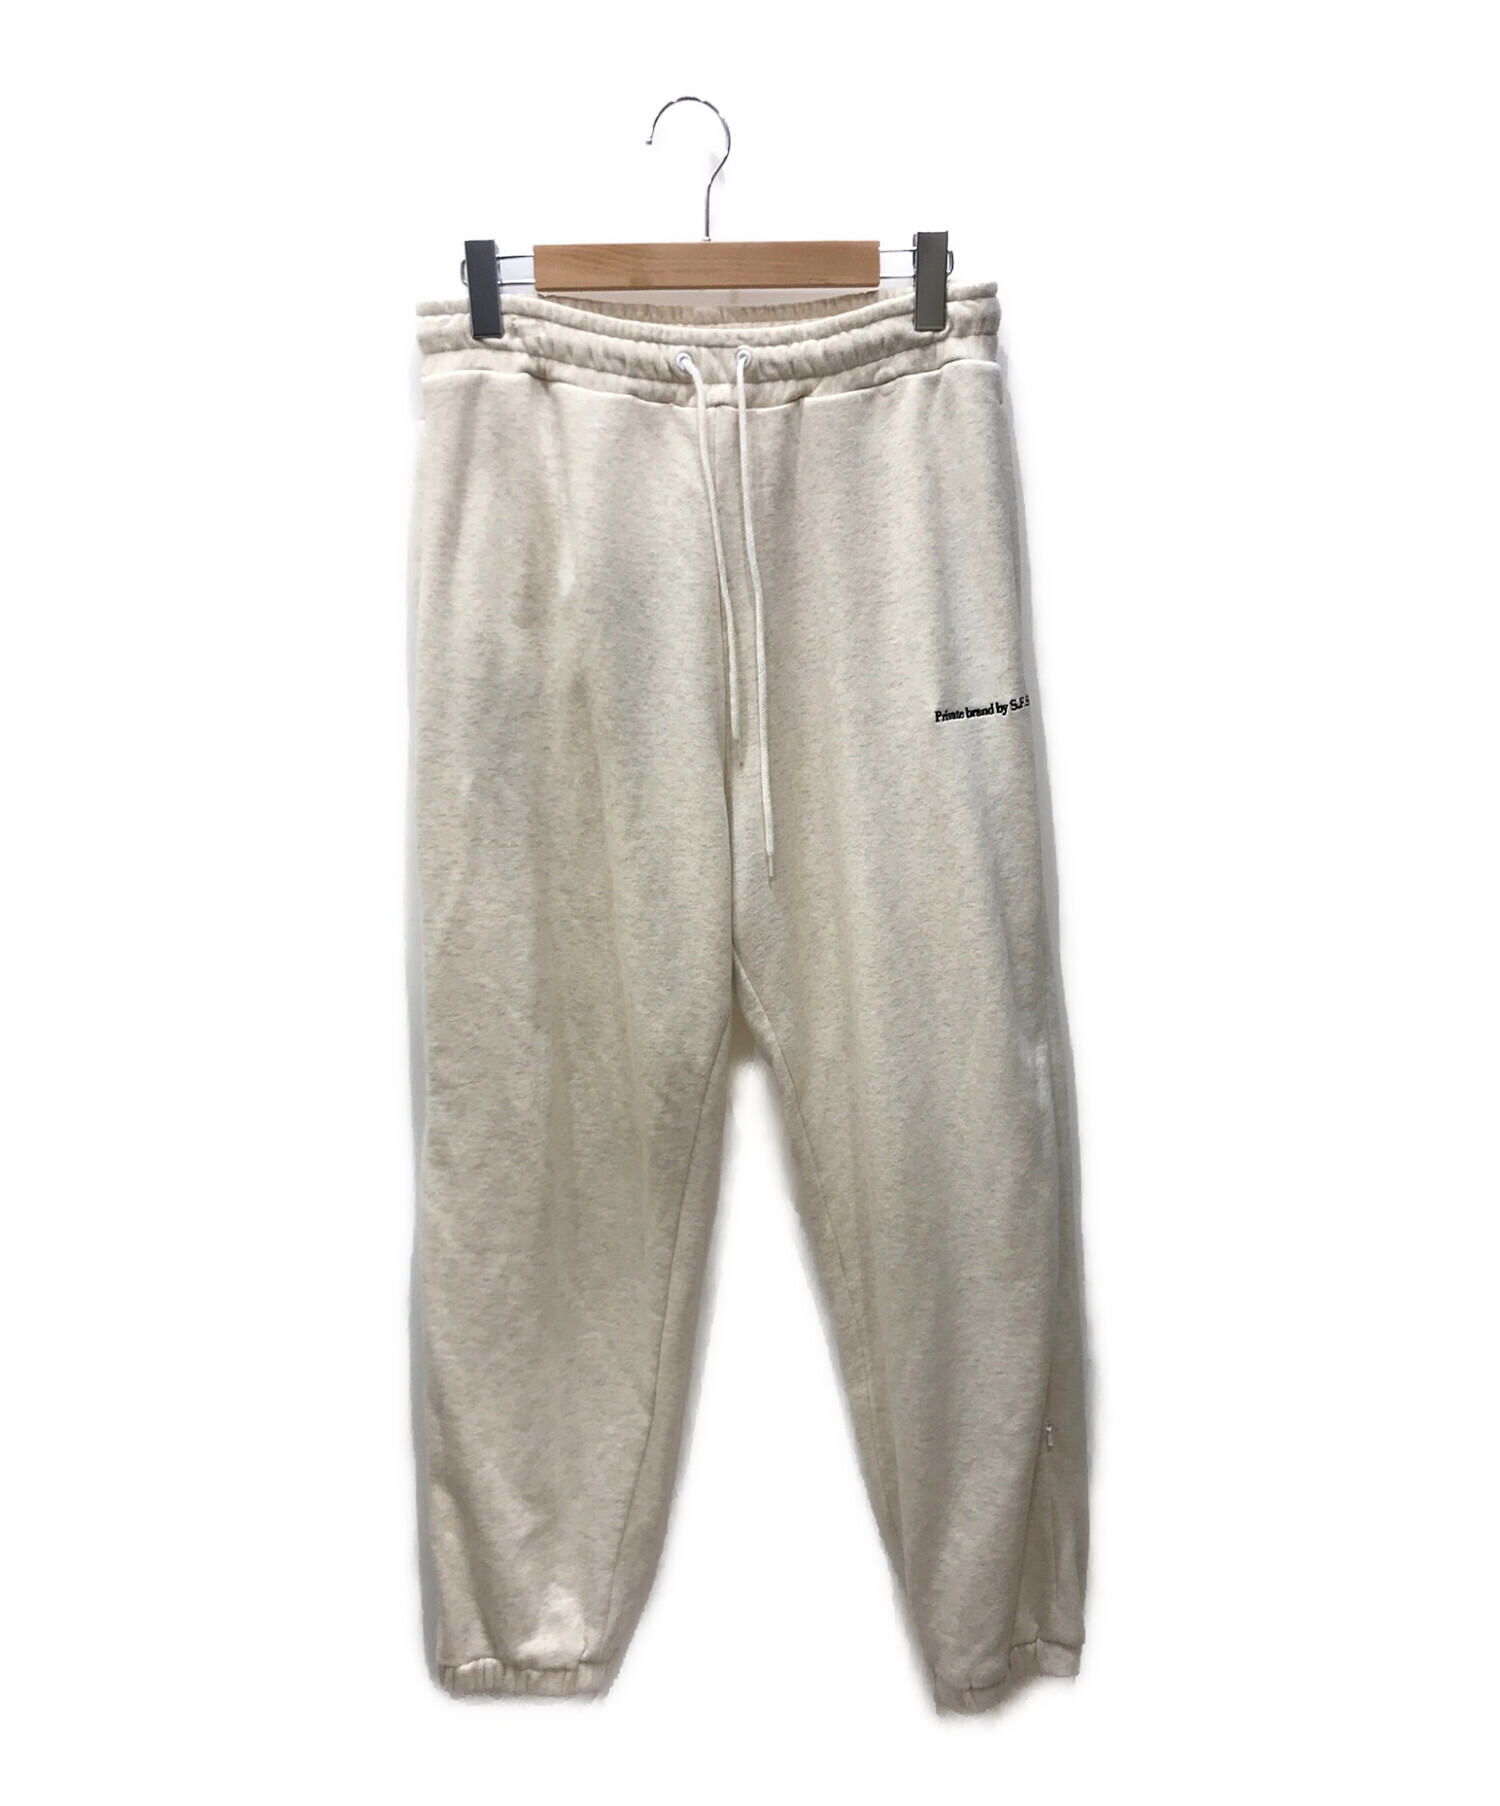 Private brand by SFS Classic Sweat Pants